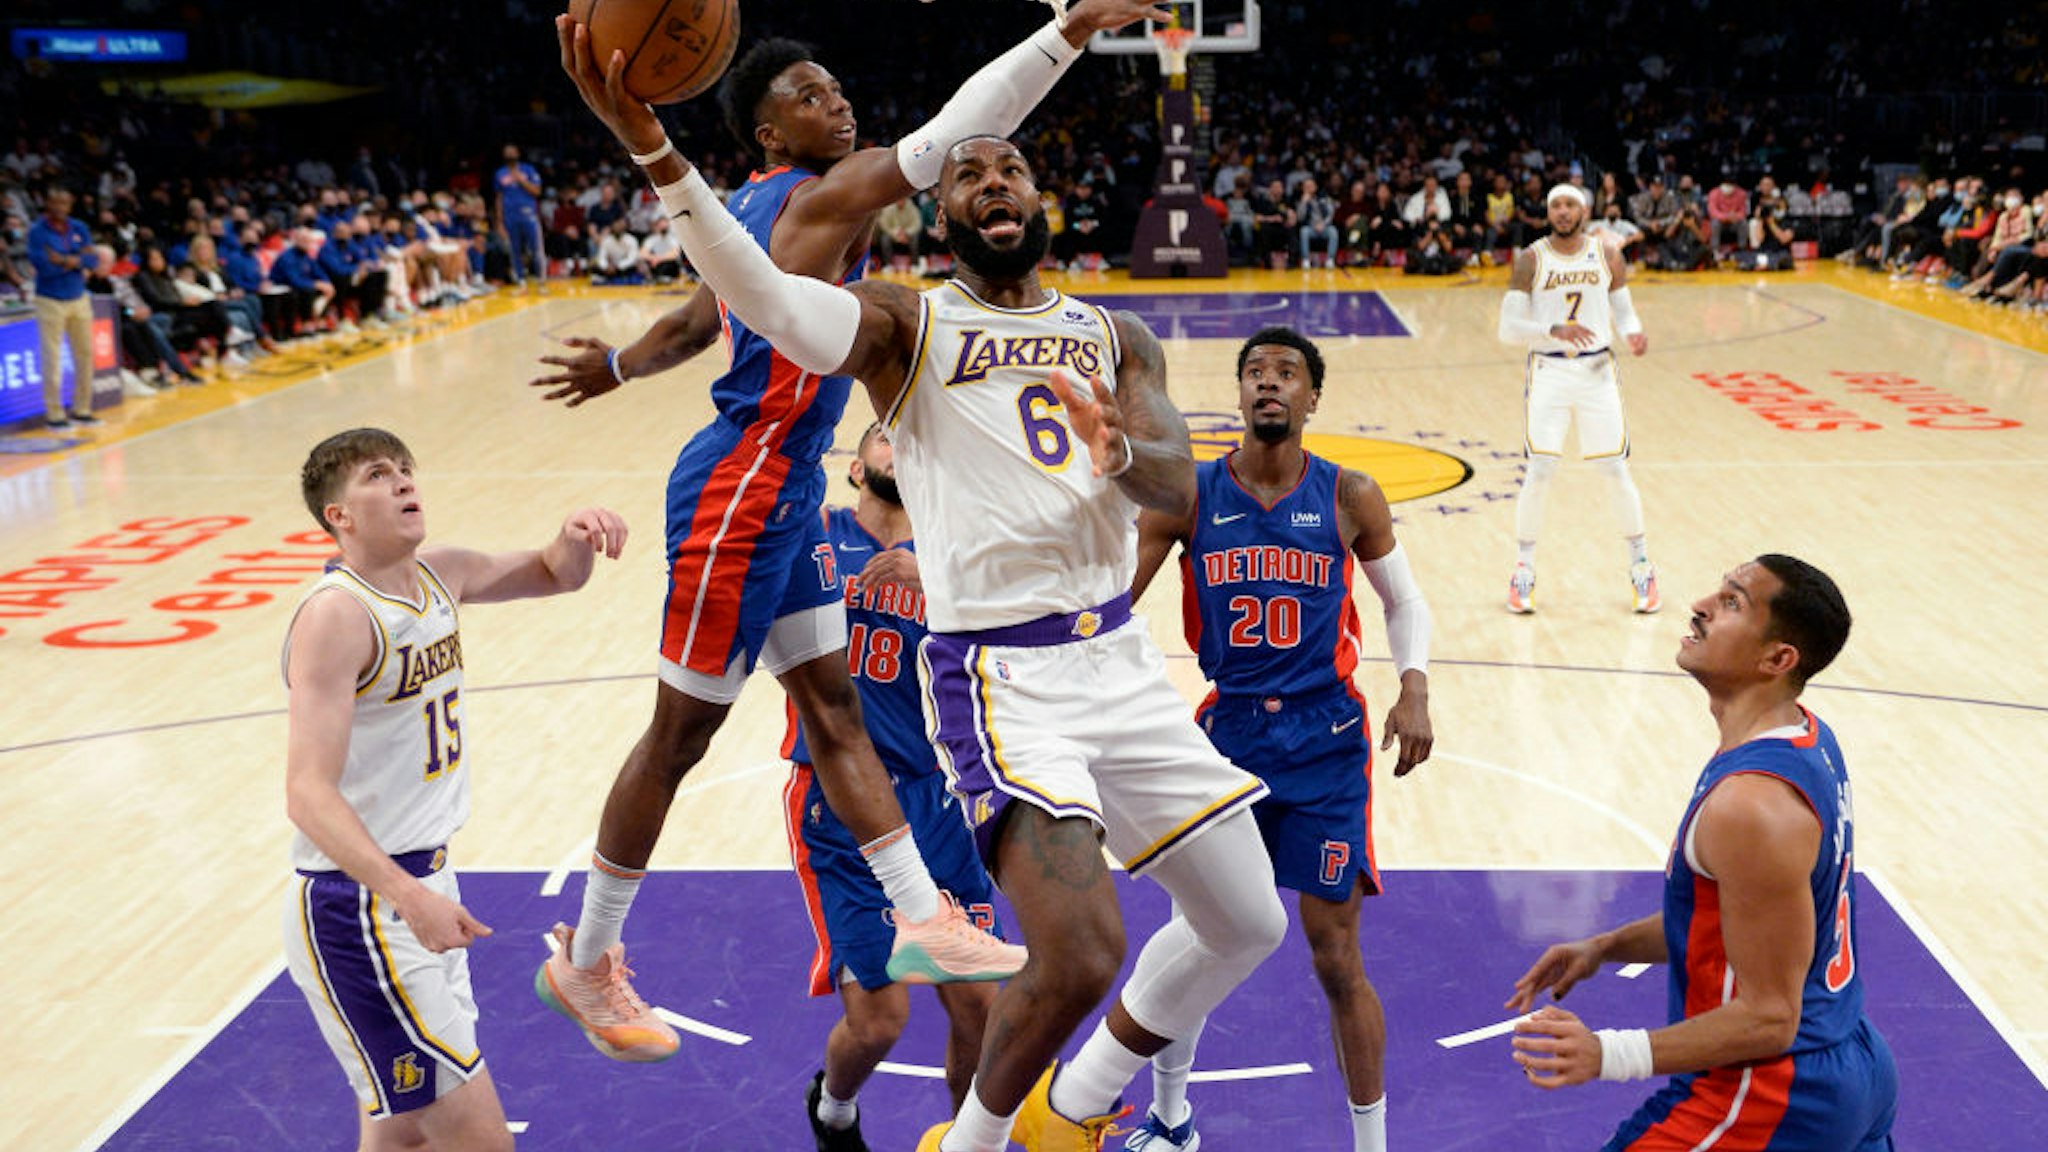 LOS ANGELES, CA - NOVEMBER 28: LeBron James #6 of the Los Angeles Lakers drives to the basket ahead of Hamidou Diallo #6 of the Detroit Pistons during the first half at Staples Center on November 28, 2021 in Los Angeles, California. NOTE TO USER: User expressly acknowledges and agrees that, by downloading and/or using this Photograph, user is consenting to the terms and conditions of the Getty Images License Agreement.(Photo by Kevork Djansezian/Getty Images)